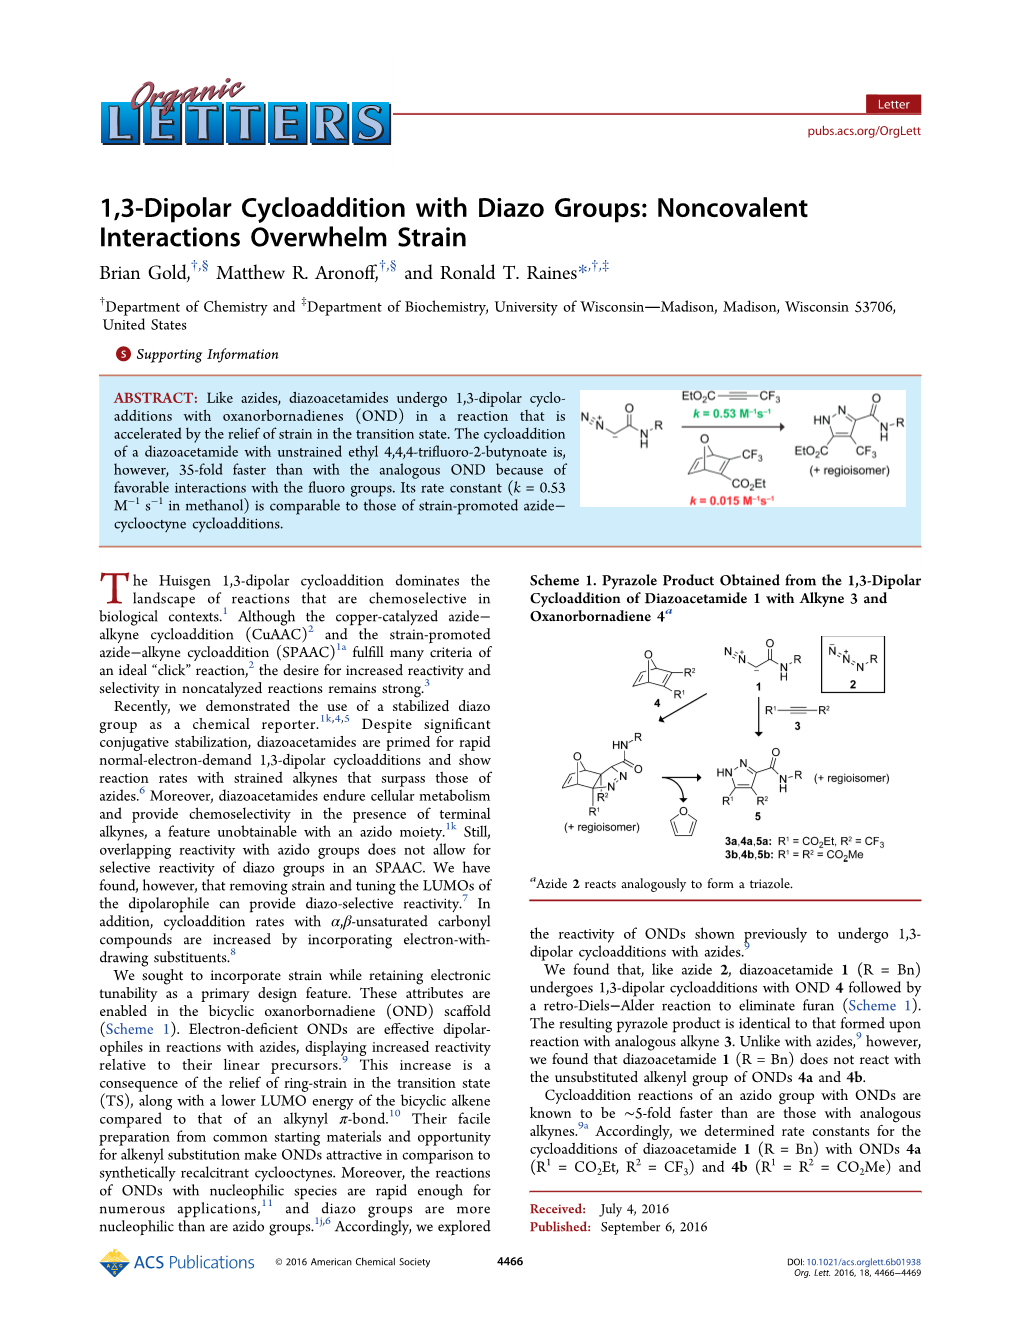 1,3-Dipolar Cycloaddition with Diazo Groups: Noncovalent Interactions Overwhelm Strain Brian Gold,†,§ Matthew R